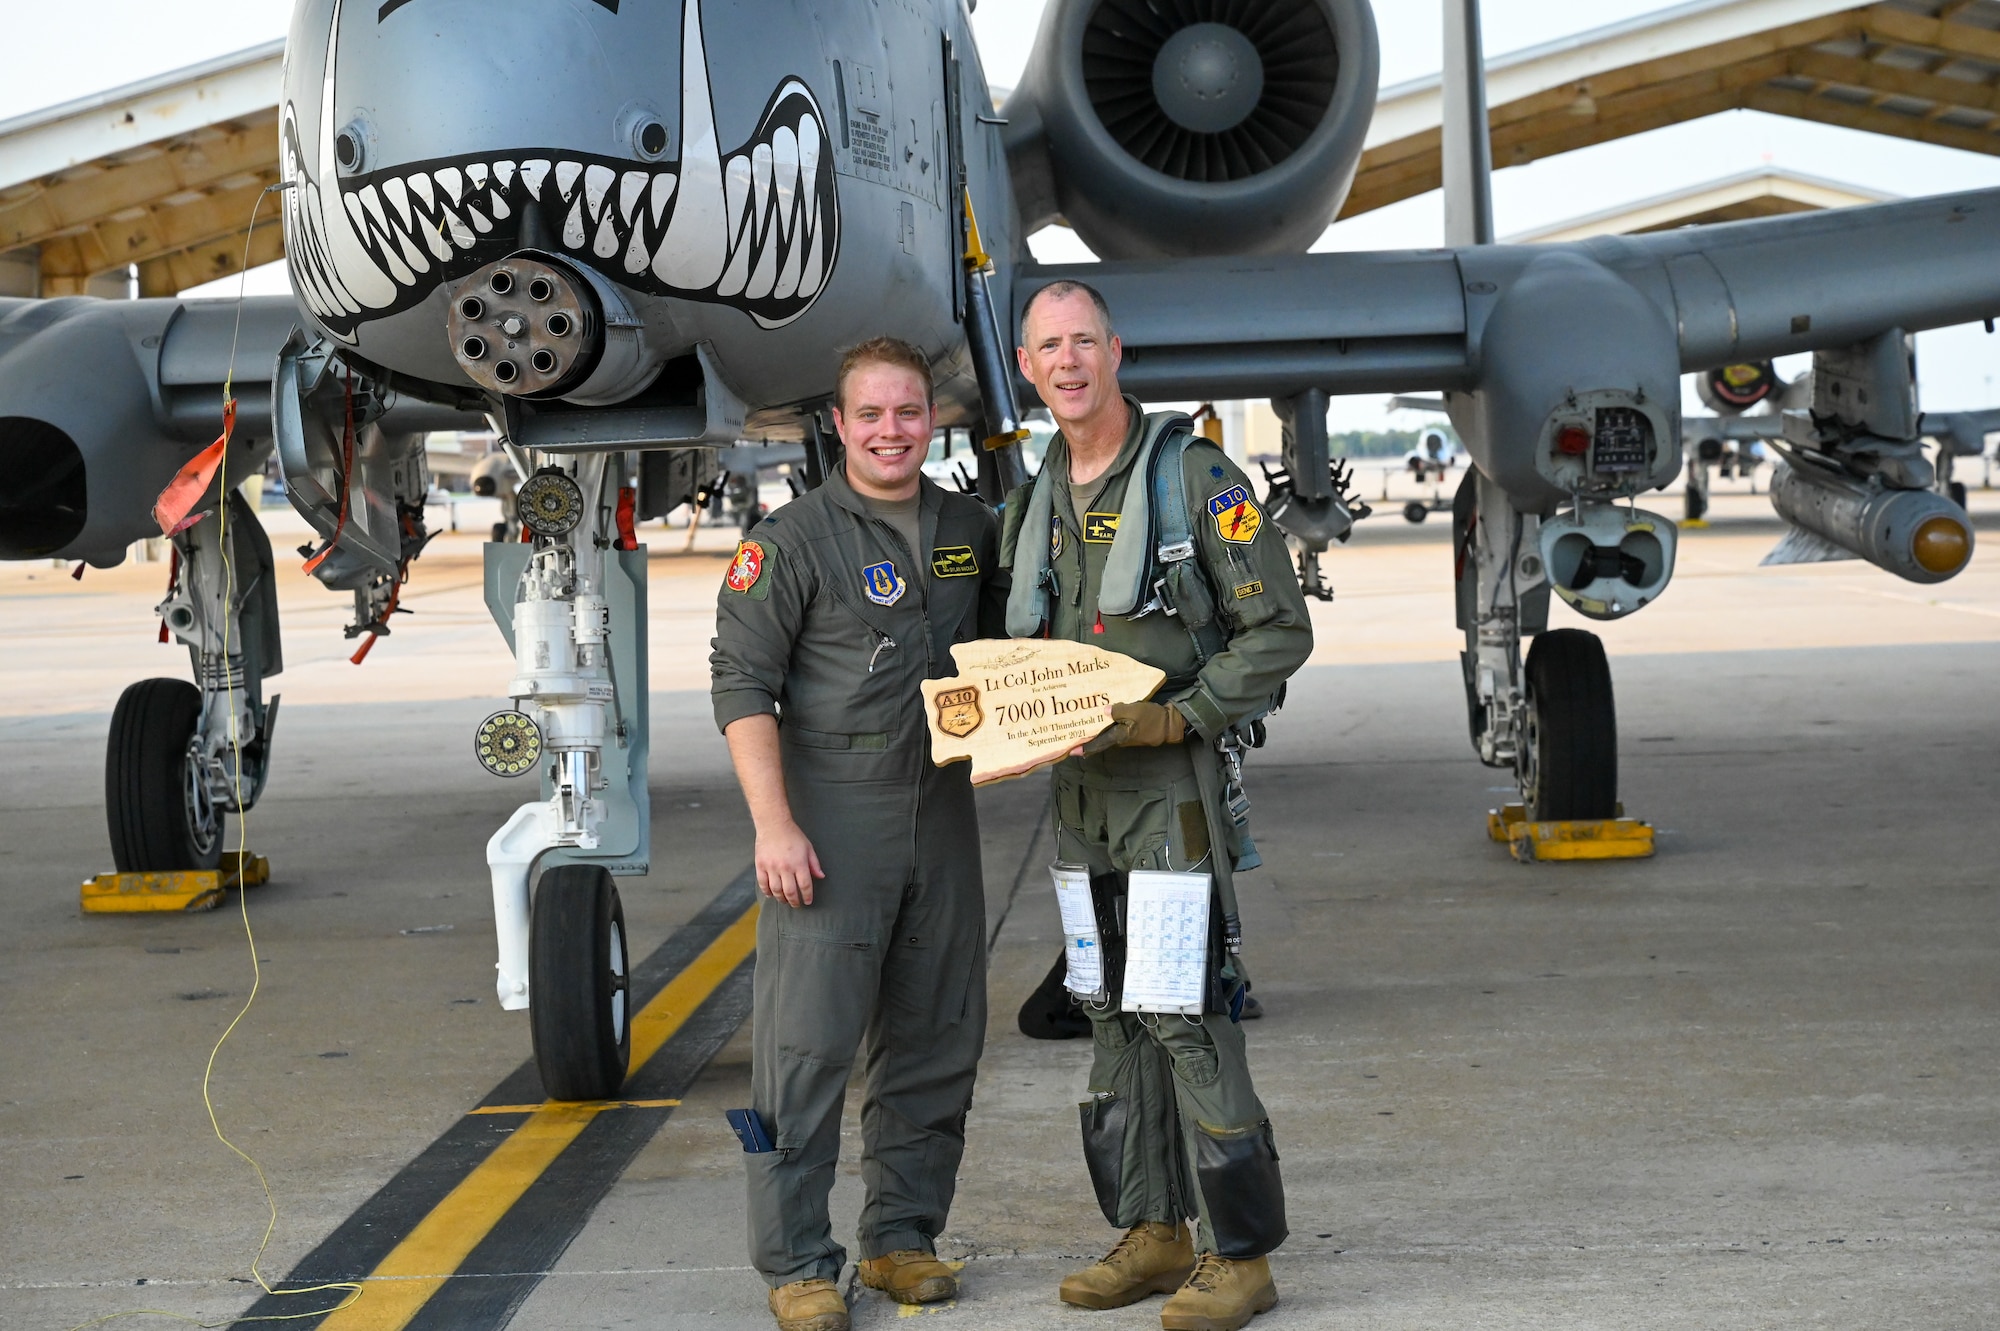 Lt. Col. John “Karl” Marks and 1st Lt. Dylan Mackey, A-10C Thunderbolt II pilots pose in front of an A-10C Thunderbolt II on Sept. 1, 2021 at Whiteman AFB, Mo. Marks, the longest flying A-10 pilot requested to fly with Mackey, the youngest pilot in the 303rd Fighter Squadron. 

Photo by U.S. Air Force Maj. Shelley Ecklebe